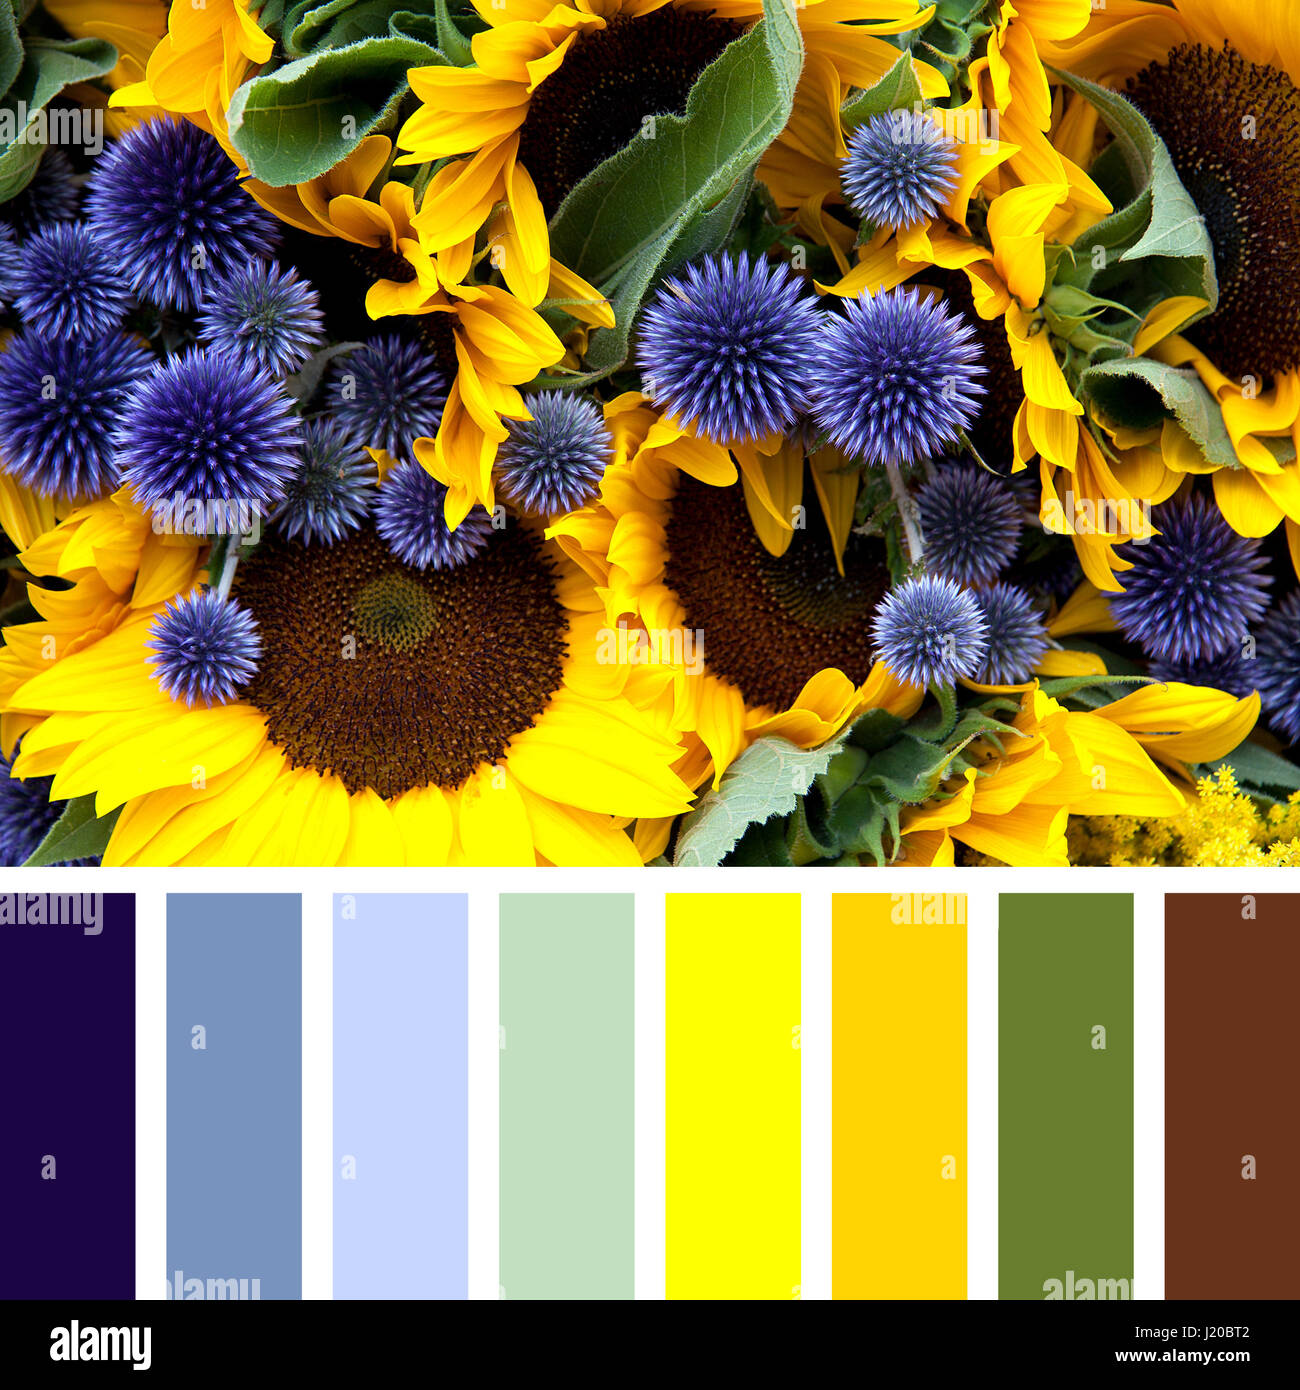 Closeup or sunflowers and allium flowers, in a colour palette with complimentary colour swatches. Stock Photo